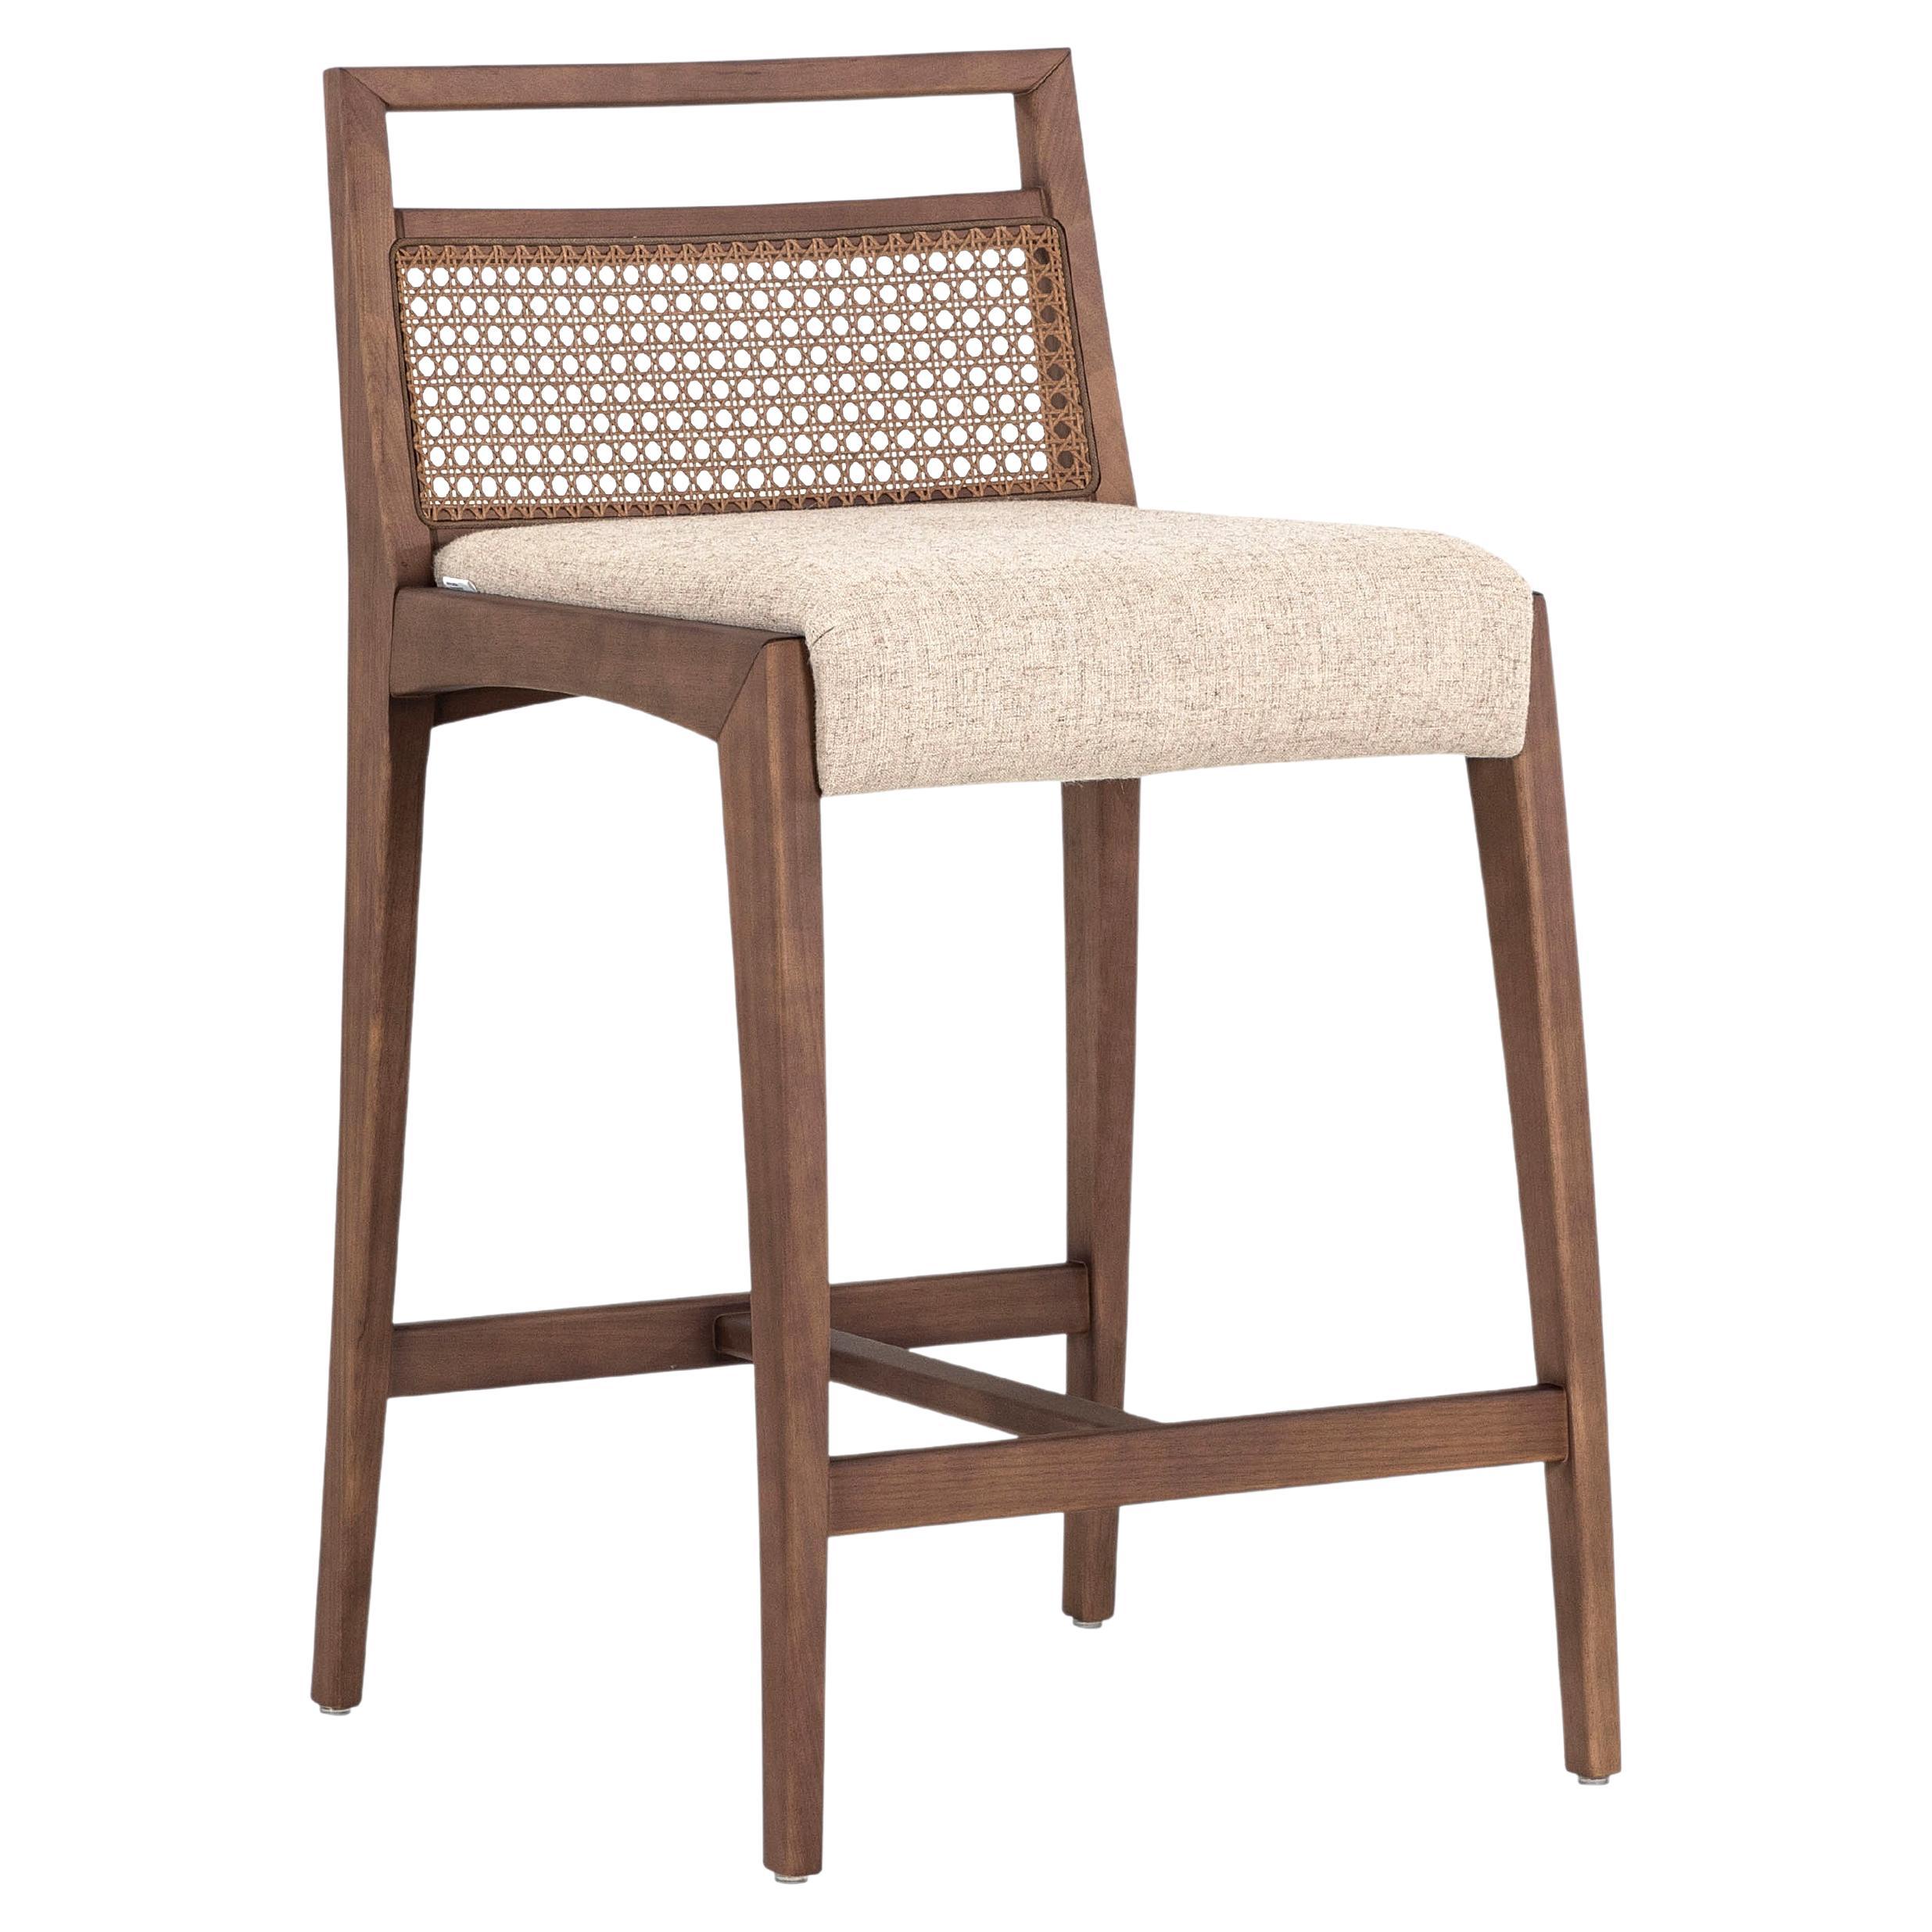 Sotto Counter Stool Beige Fabric and Walnut Solid Wood